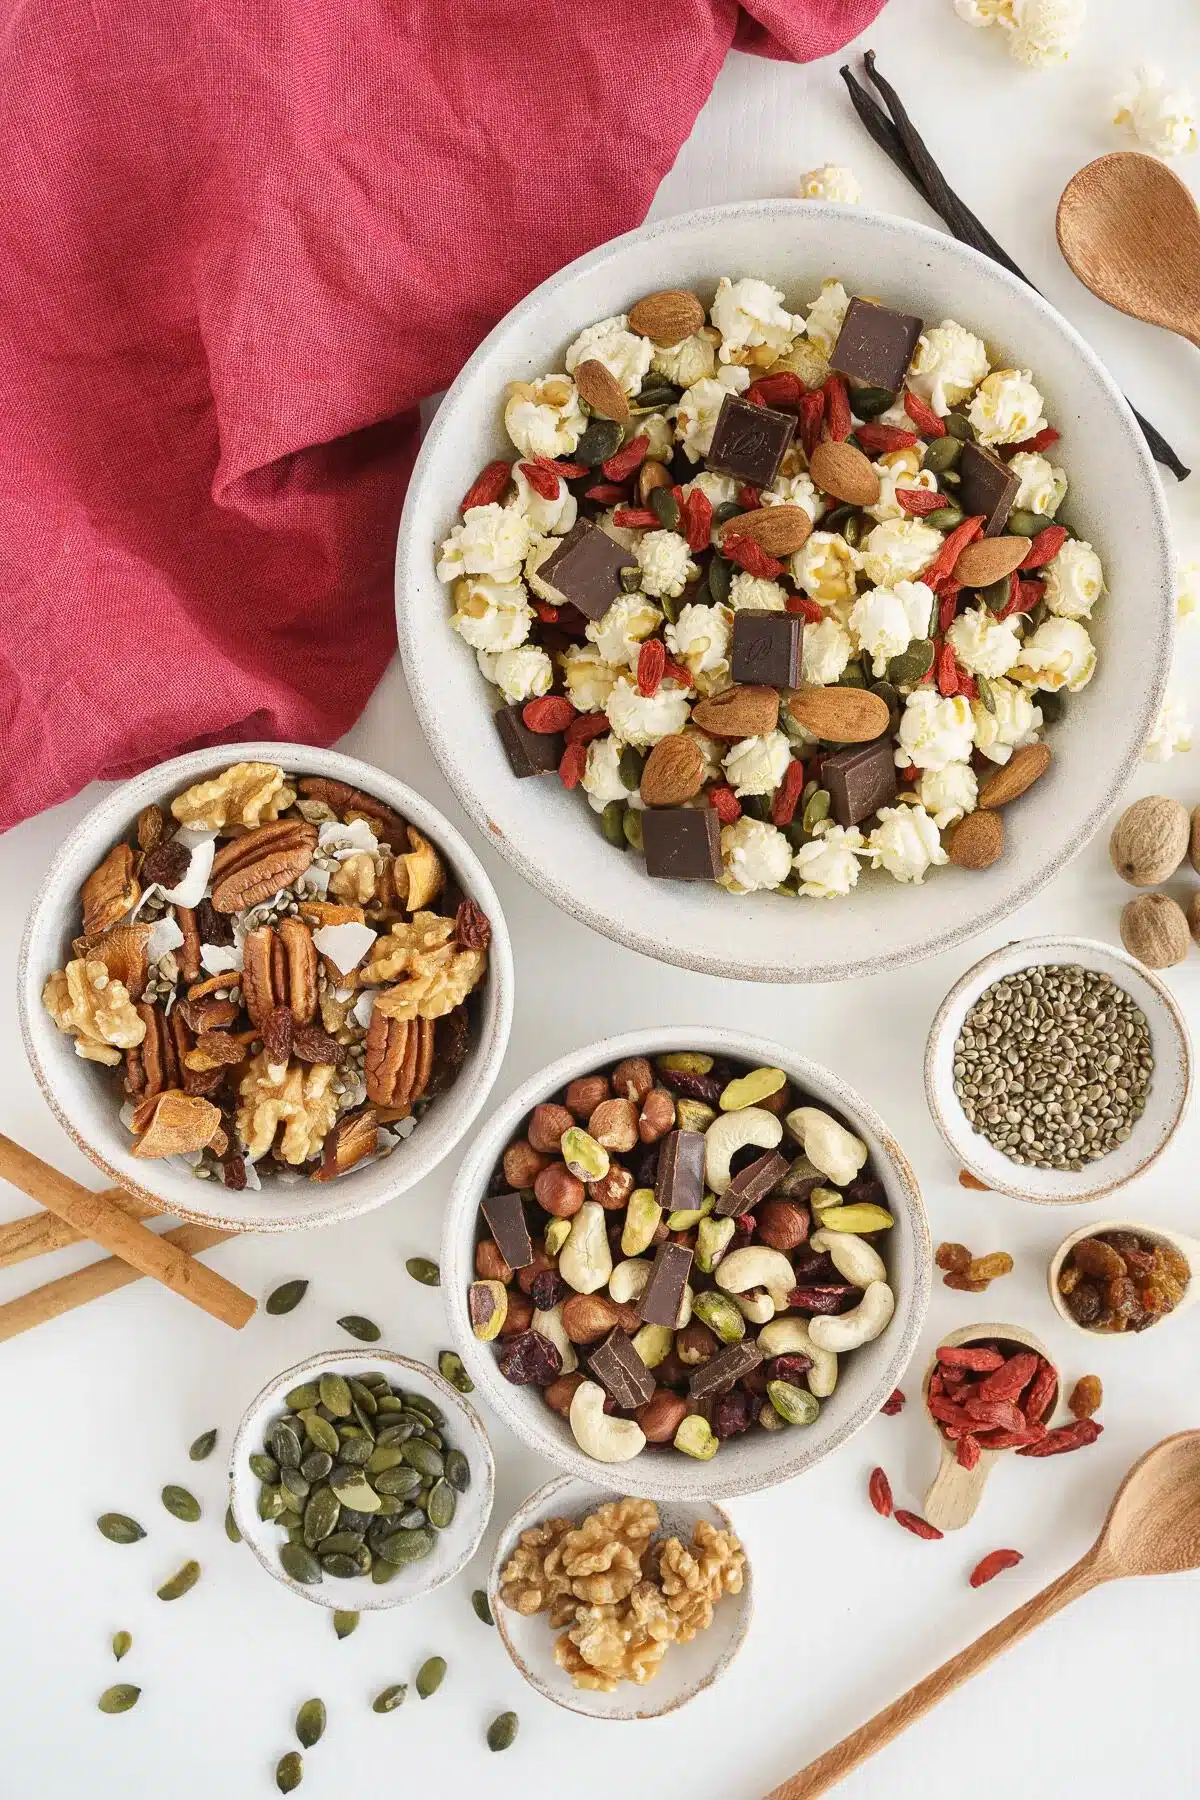 Bowls of trail mix, nuts, seeds, and popcorn are arranged on a white surface, accompanied by wooden spoons and a red cloth.